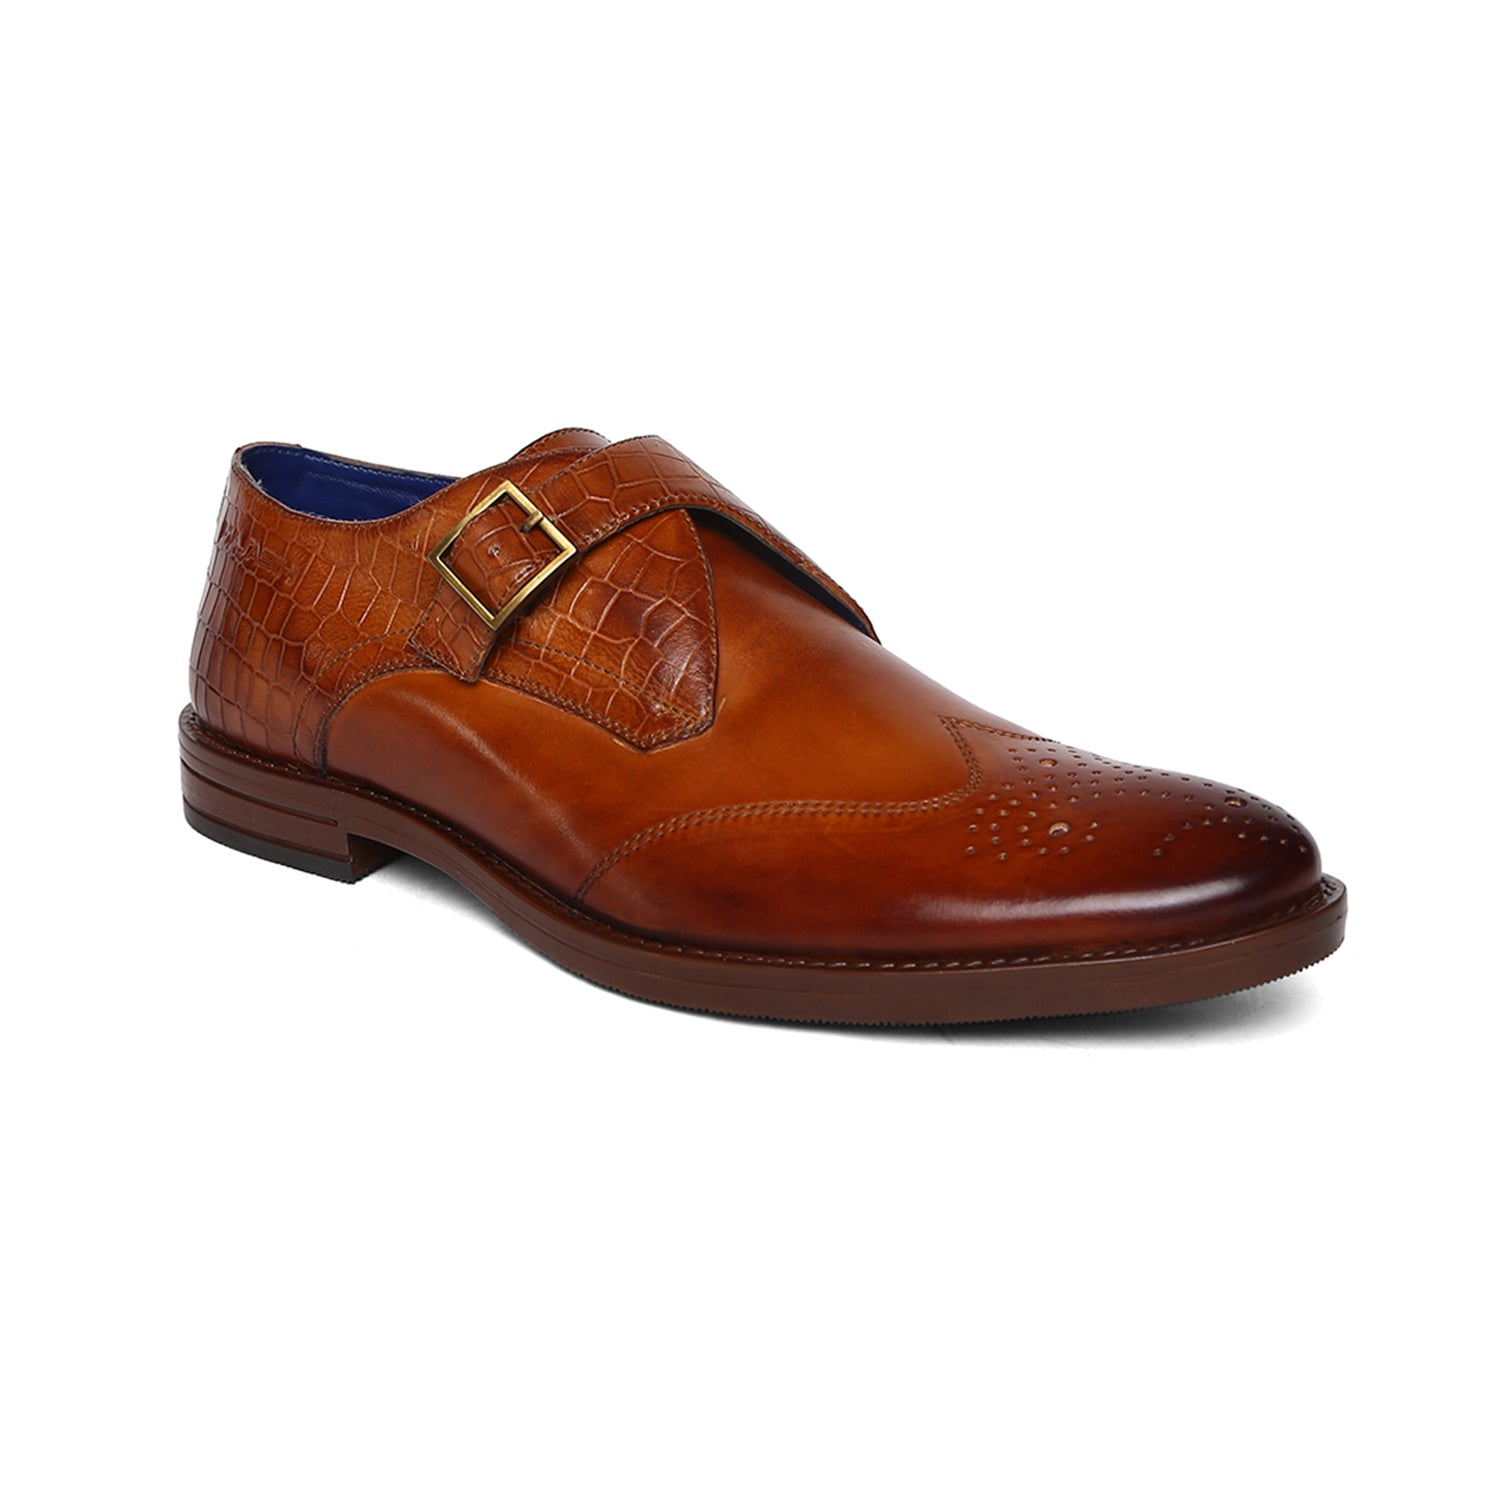 MASABIH GENUINE LEATHER TAN CASUAL MONK SHOES FOR MEN